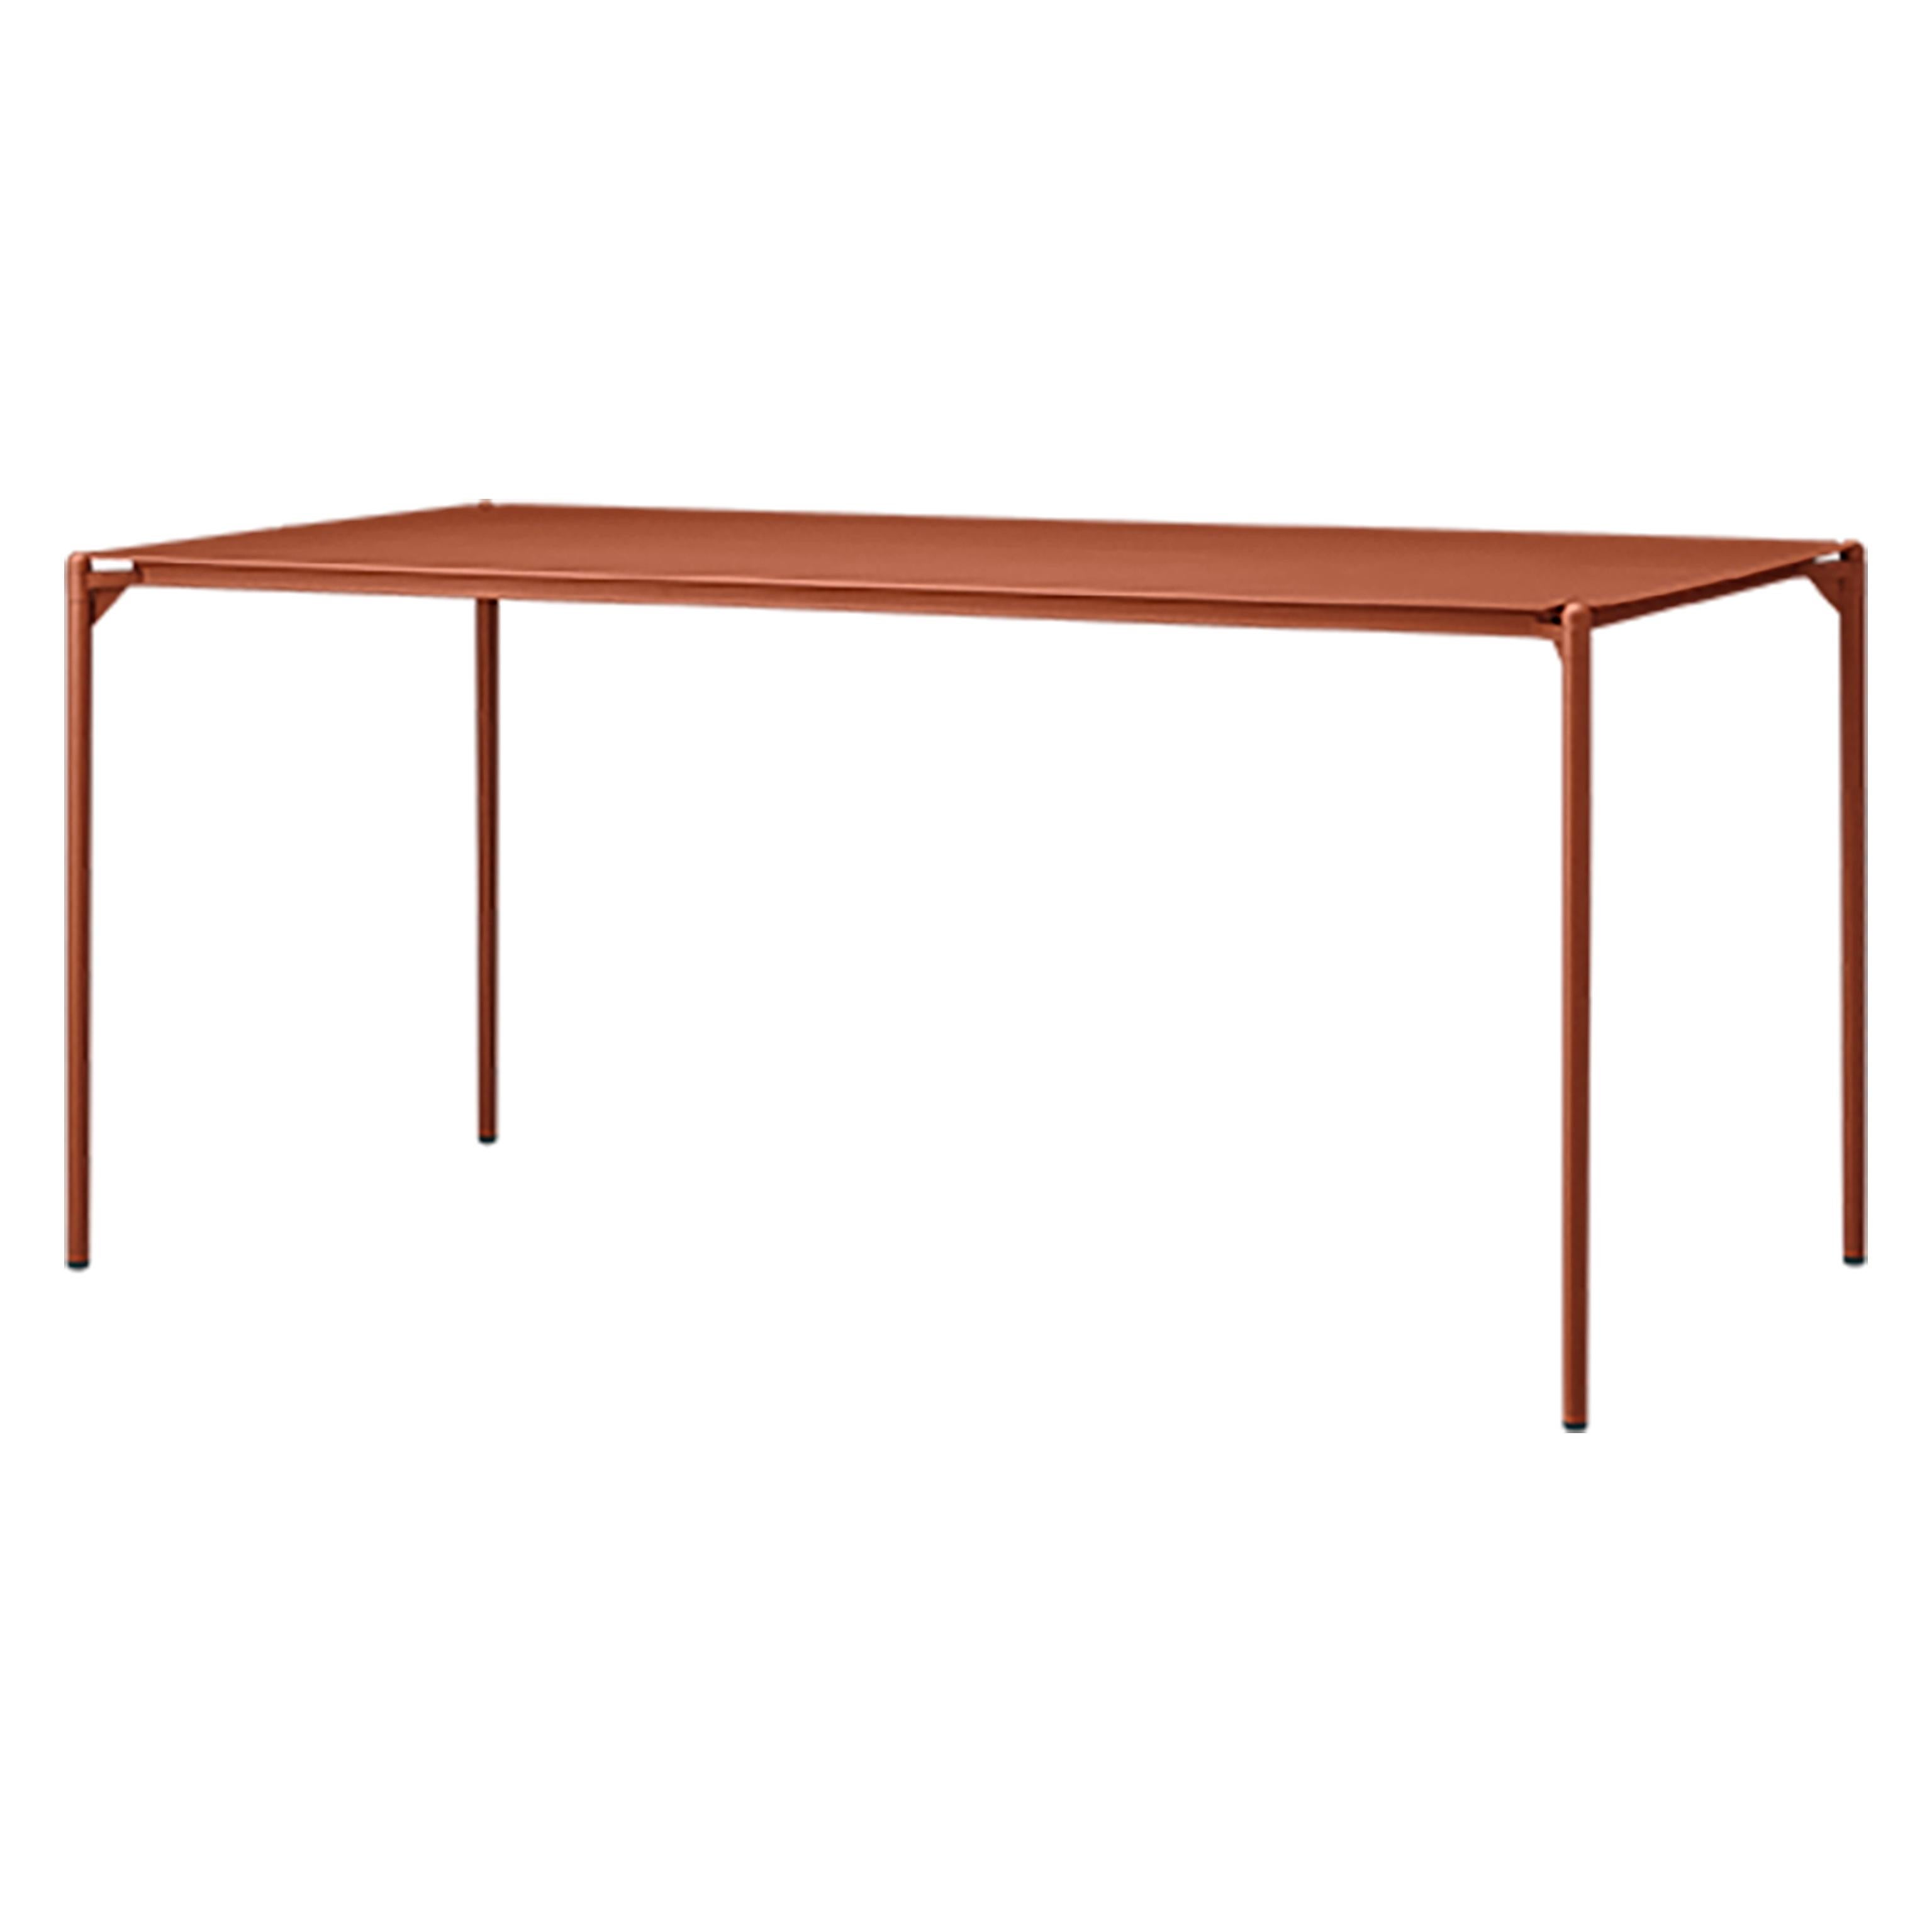 Medium ginger bread minimalist table
Dimensions: D 160 x W 80 x H 72 cm 
Materials: Steel w. Matte Powder Coating & Aluminum w. Matte Powder Coating.
Available in colors: Taupe, Bordeaux, Forest, Ginger Bread, Black and, Black and Gold. Please